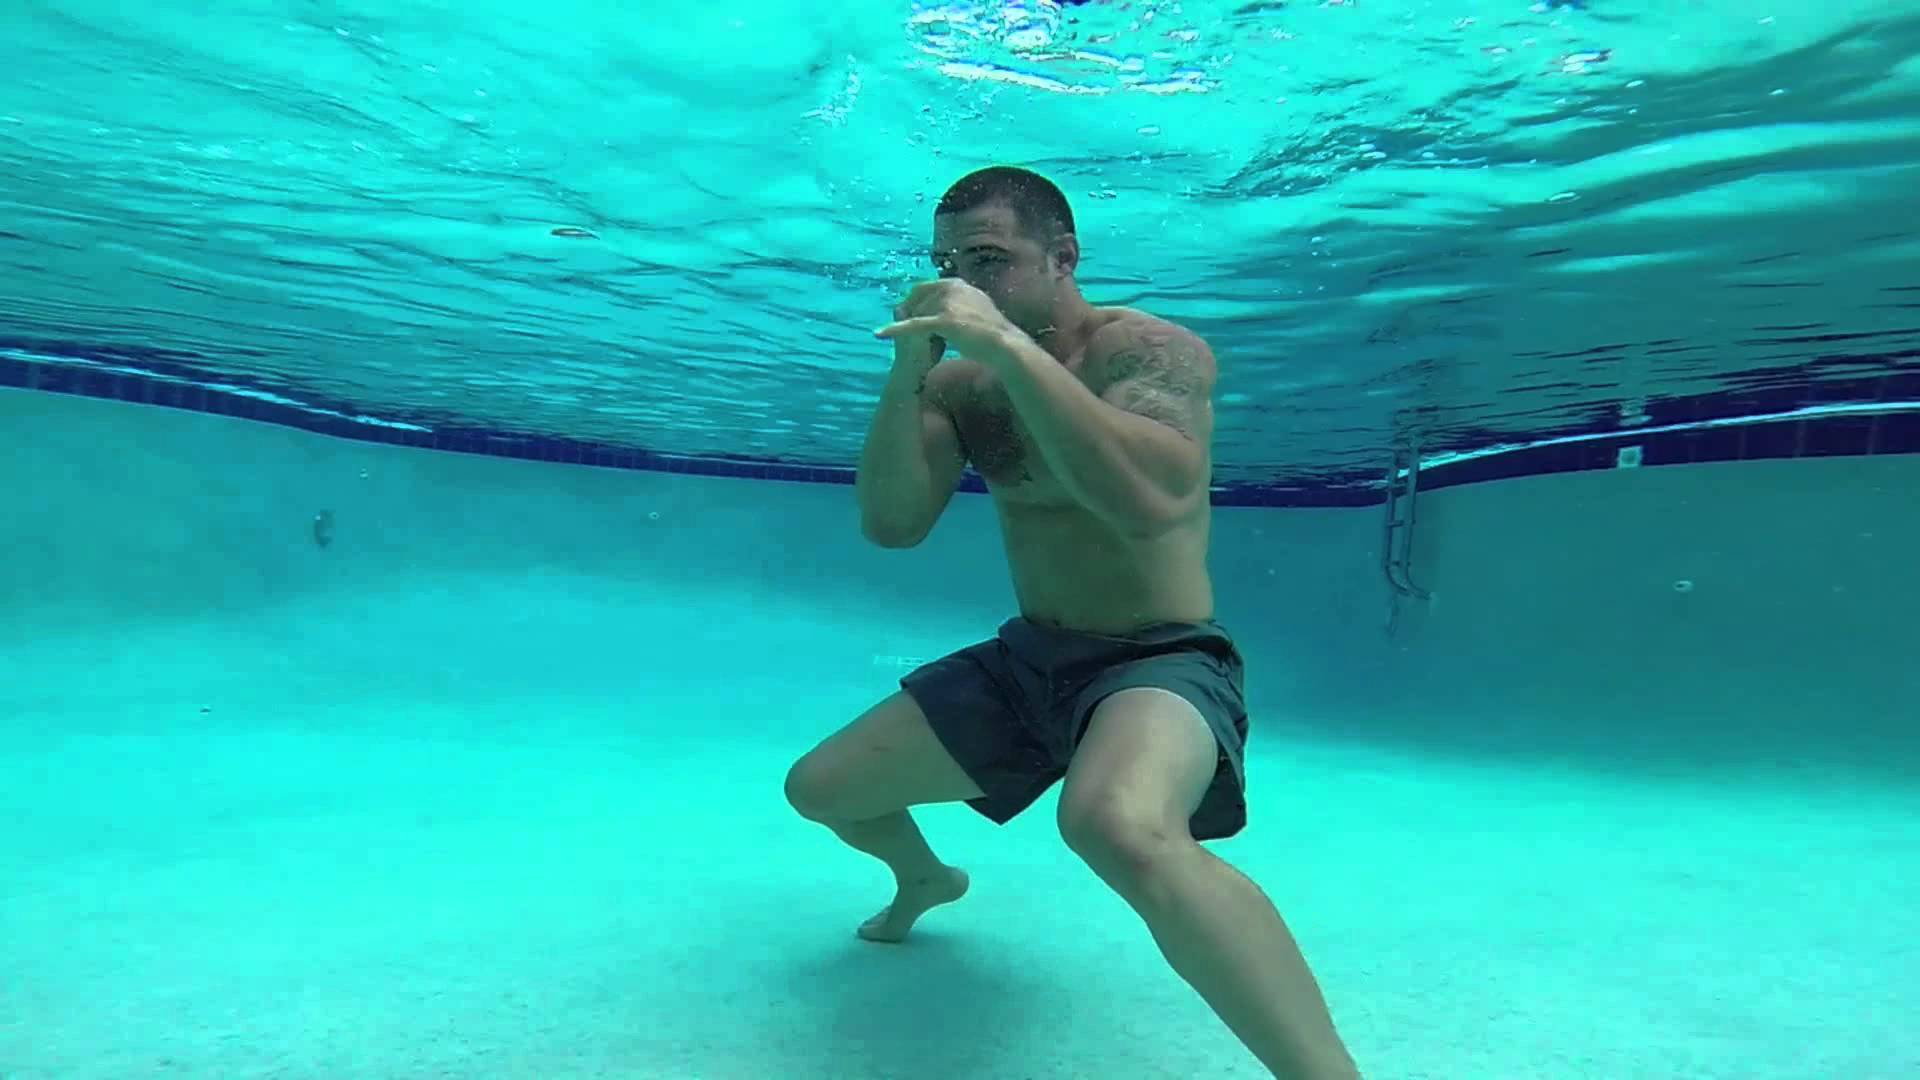 UnderWater Shadow boxing - YouTube